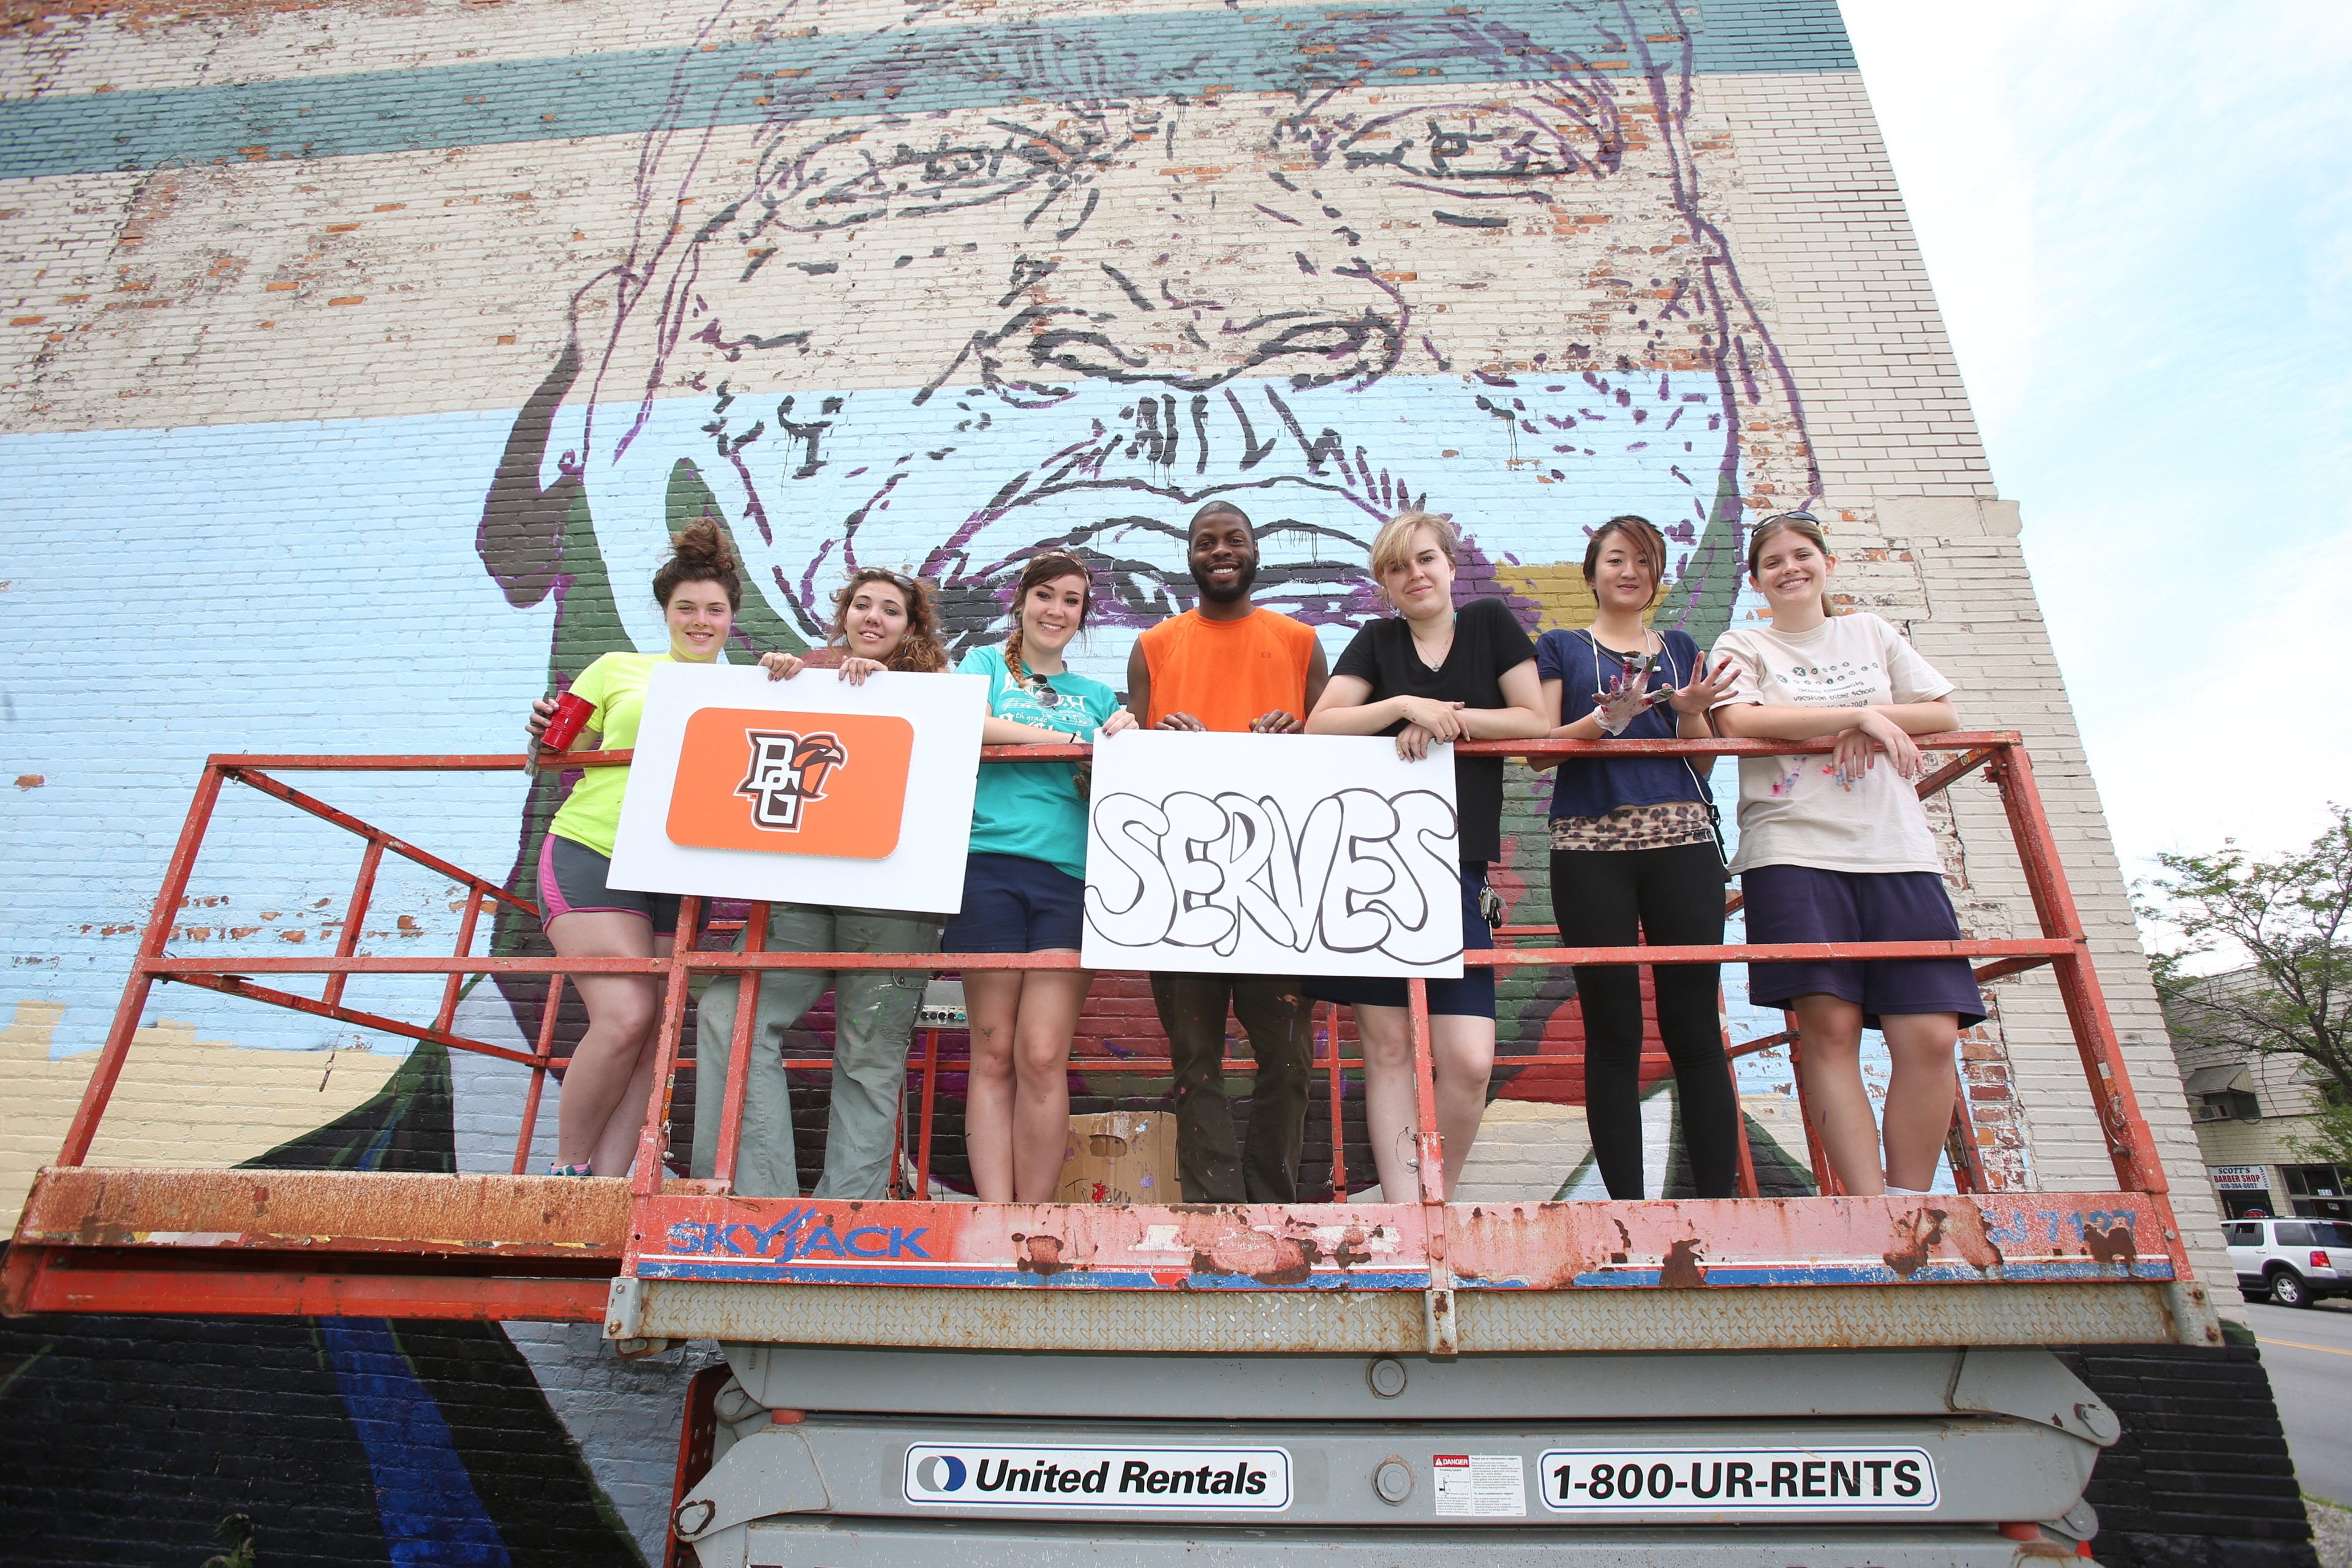 BGSU MA in art education students pose on a scissor lift in front of a mural, one of several in the northwest Ohio area that our students worked on.